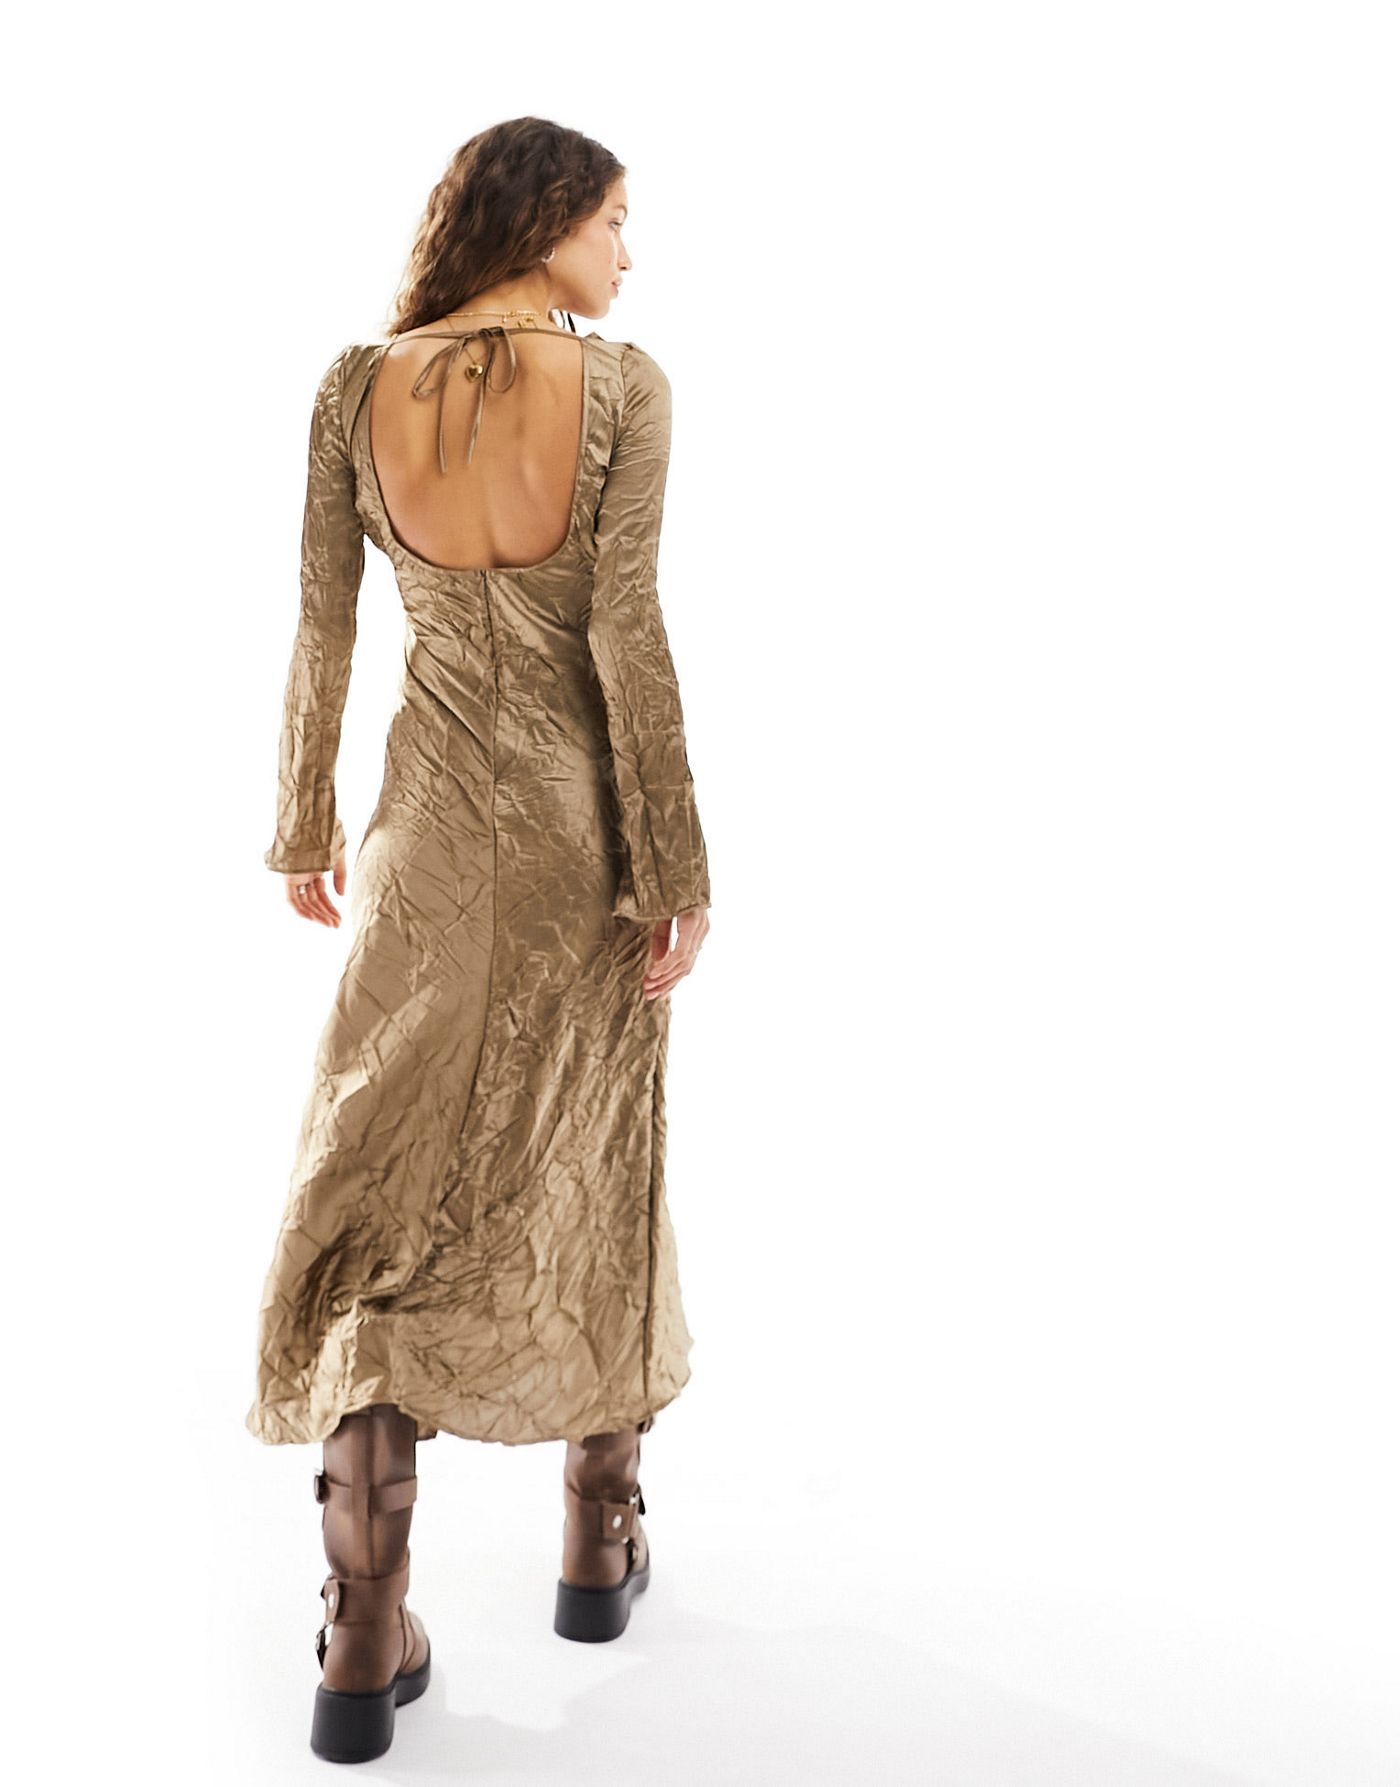 COLLUSION crinkle satin backless maxi dress in bronze 